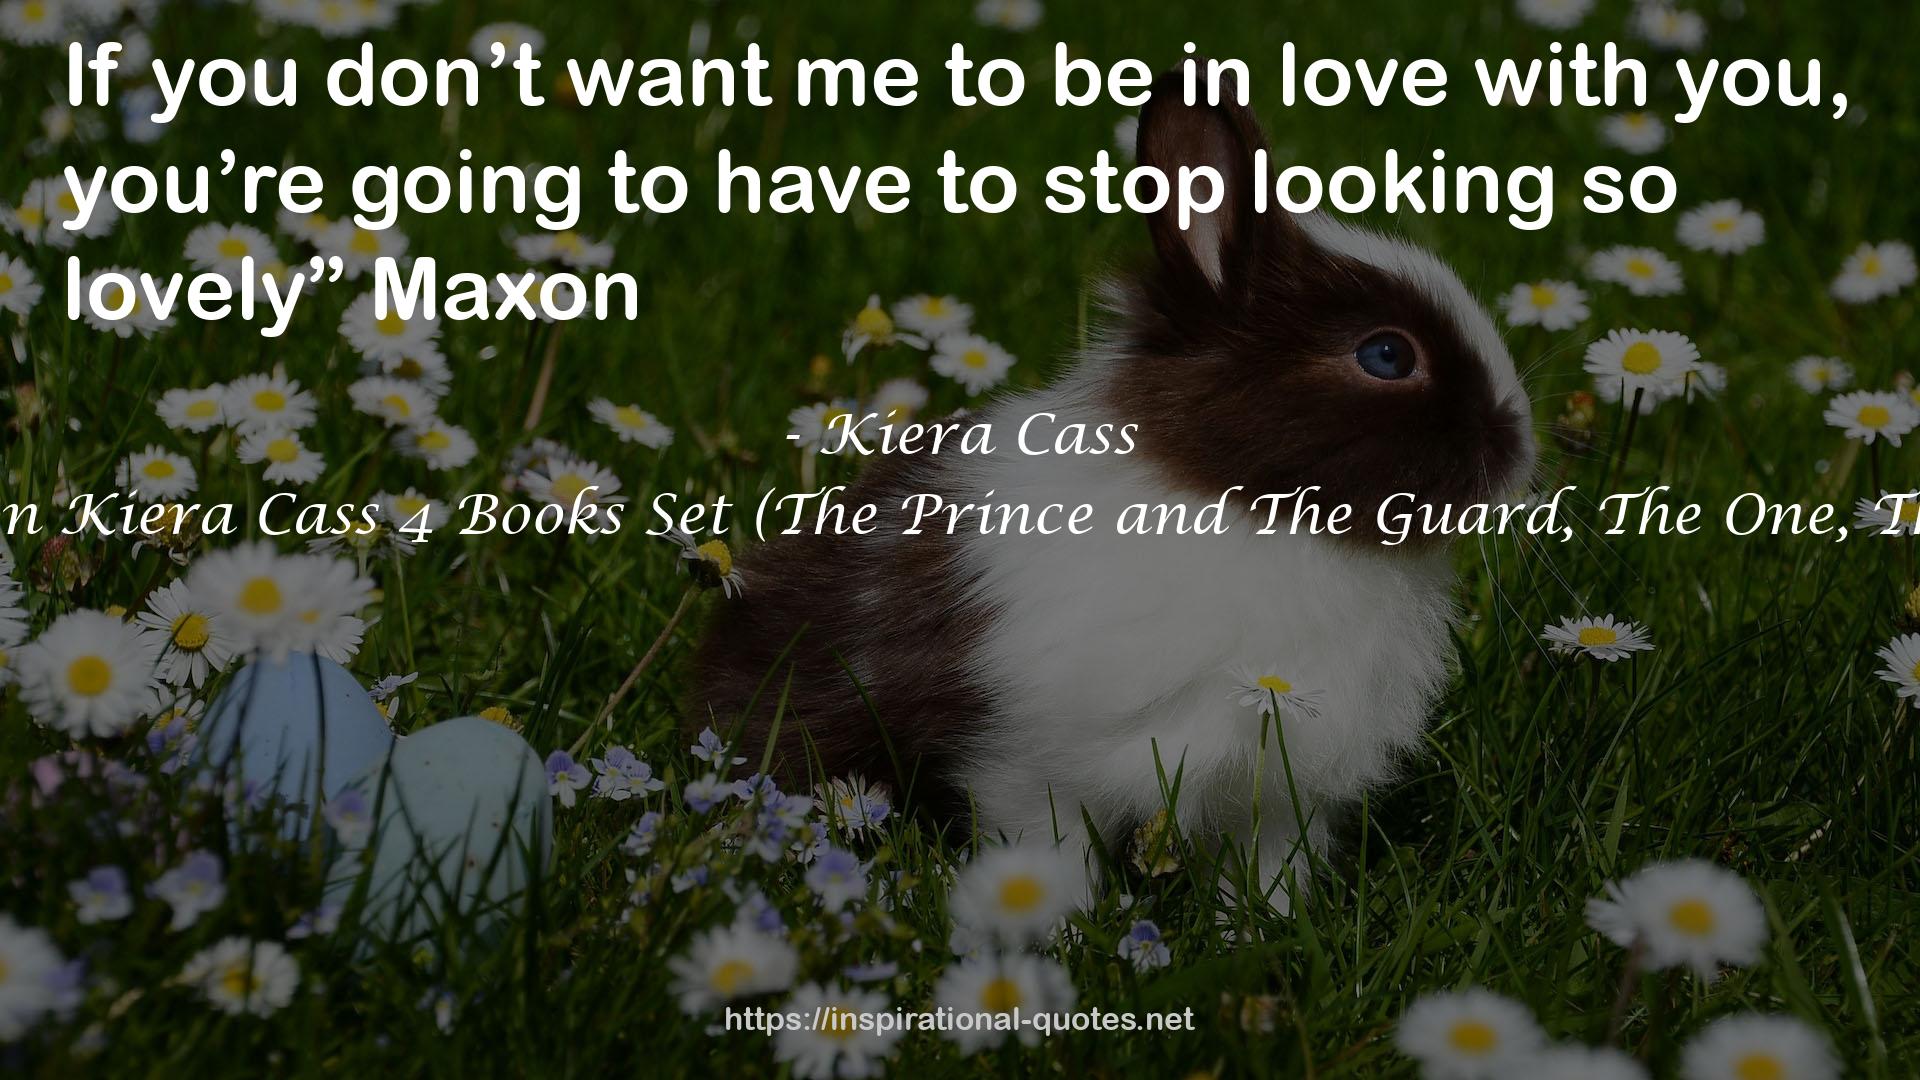 The Selection Collection Kiera Cass 4 Books Set (The Prince and The Guard, The One, The Selection, The Elite) QUOTES